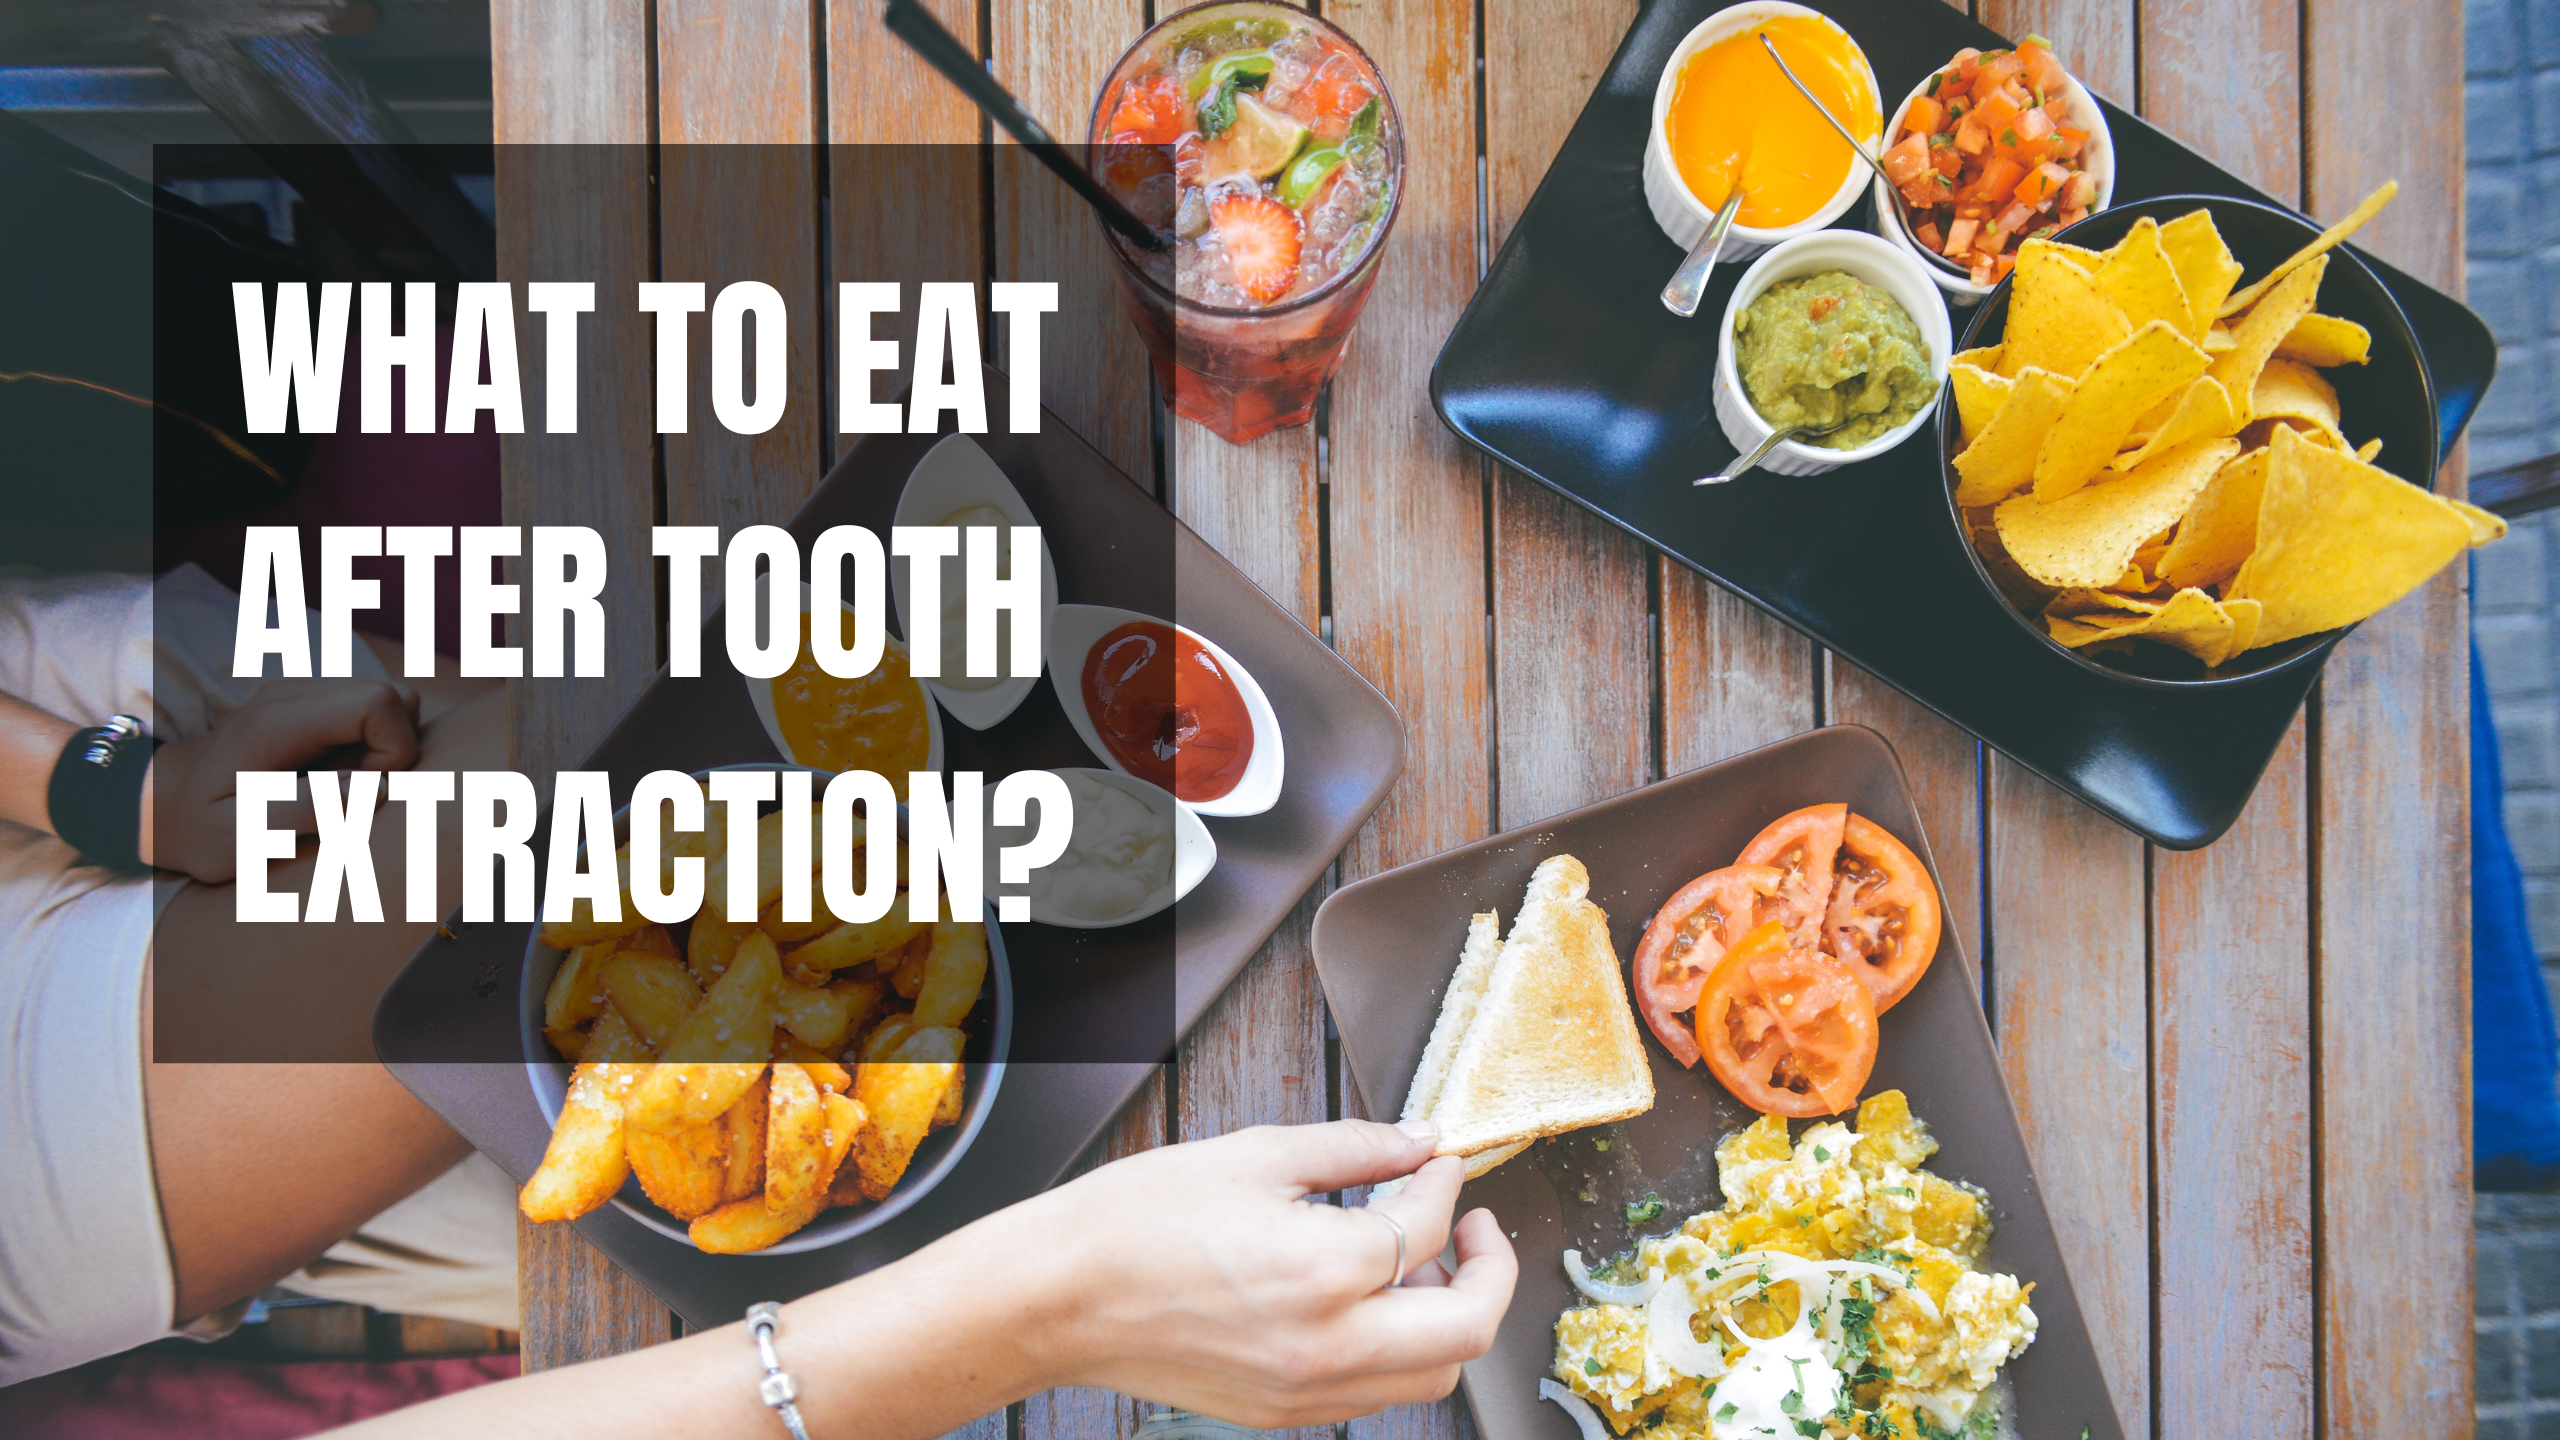 What To Eat After Tooth Extraction?